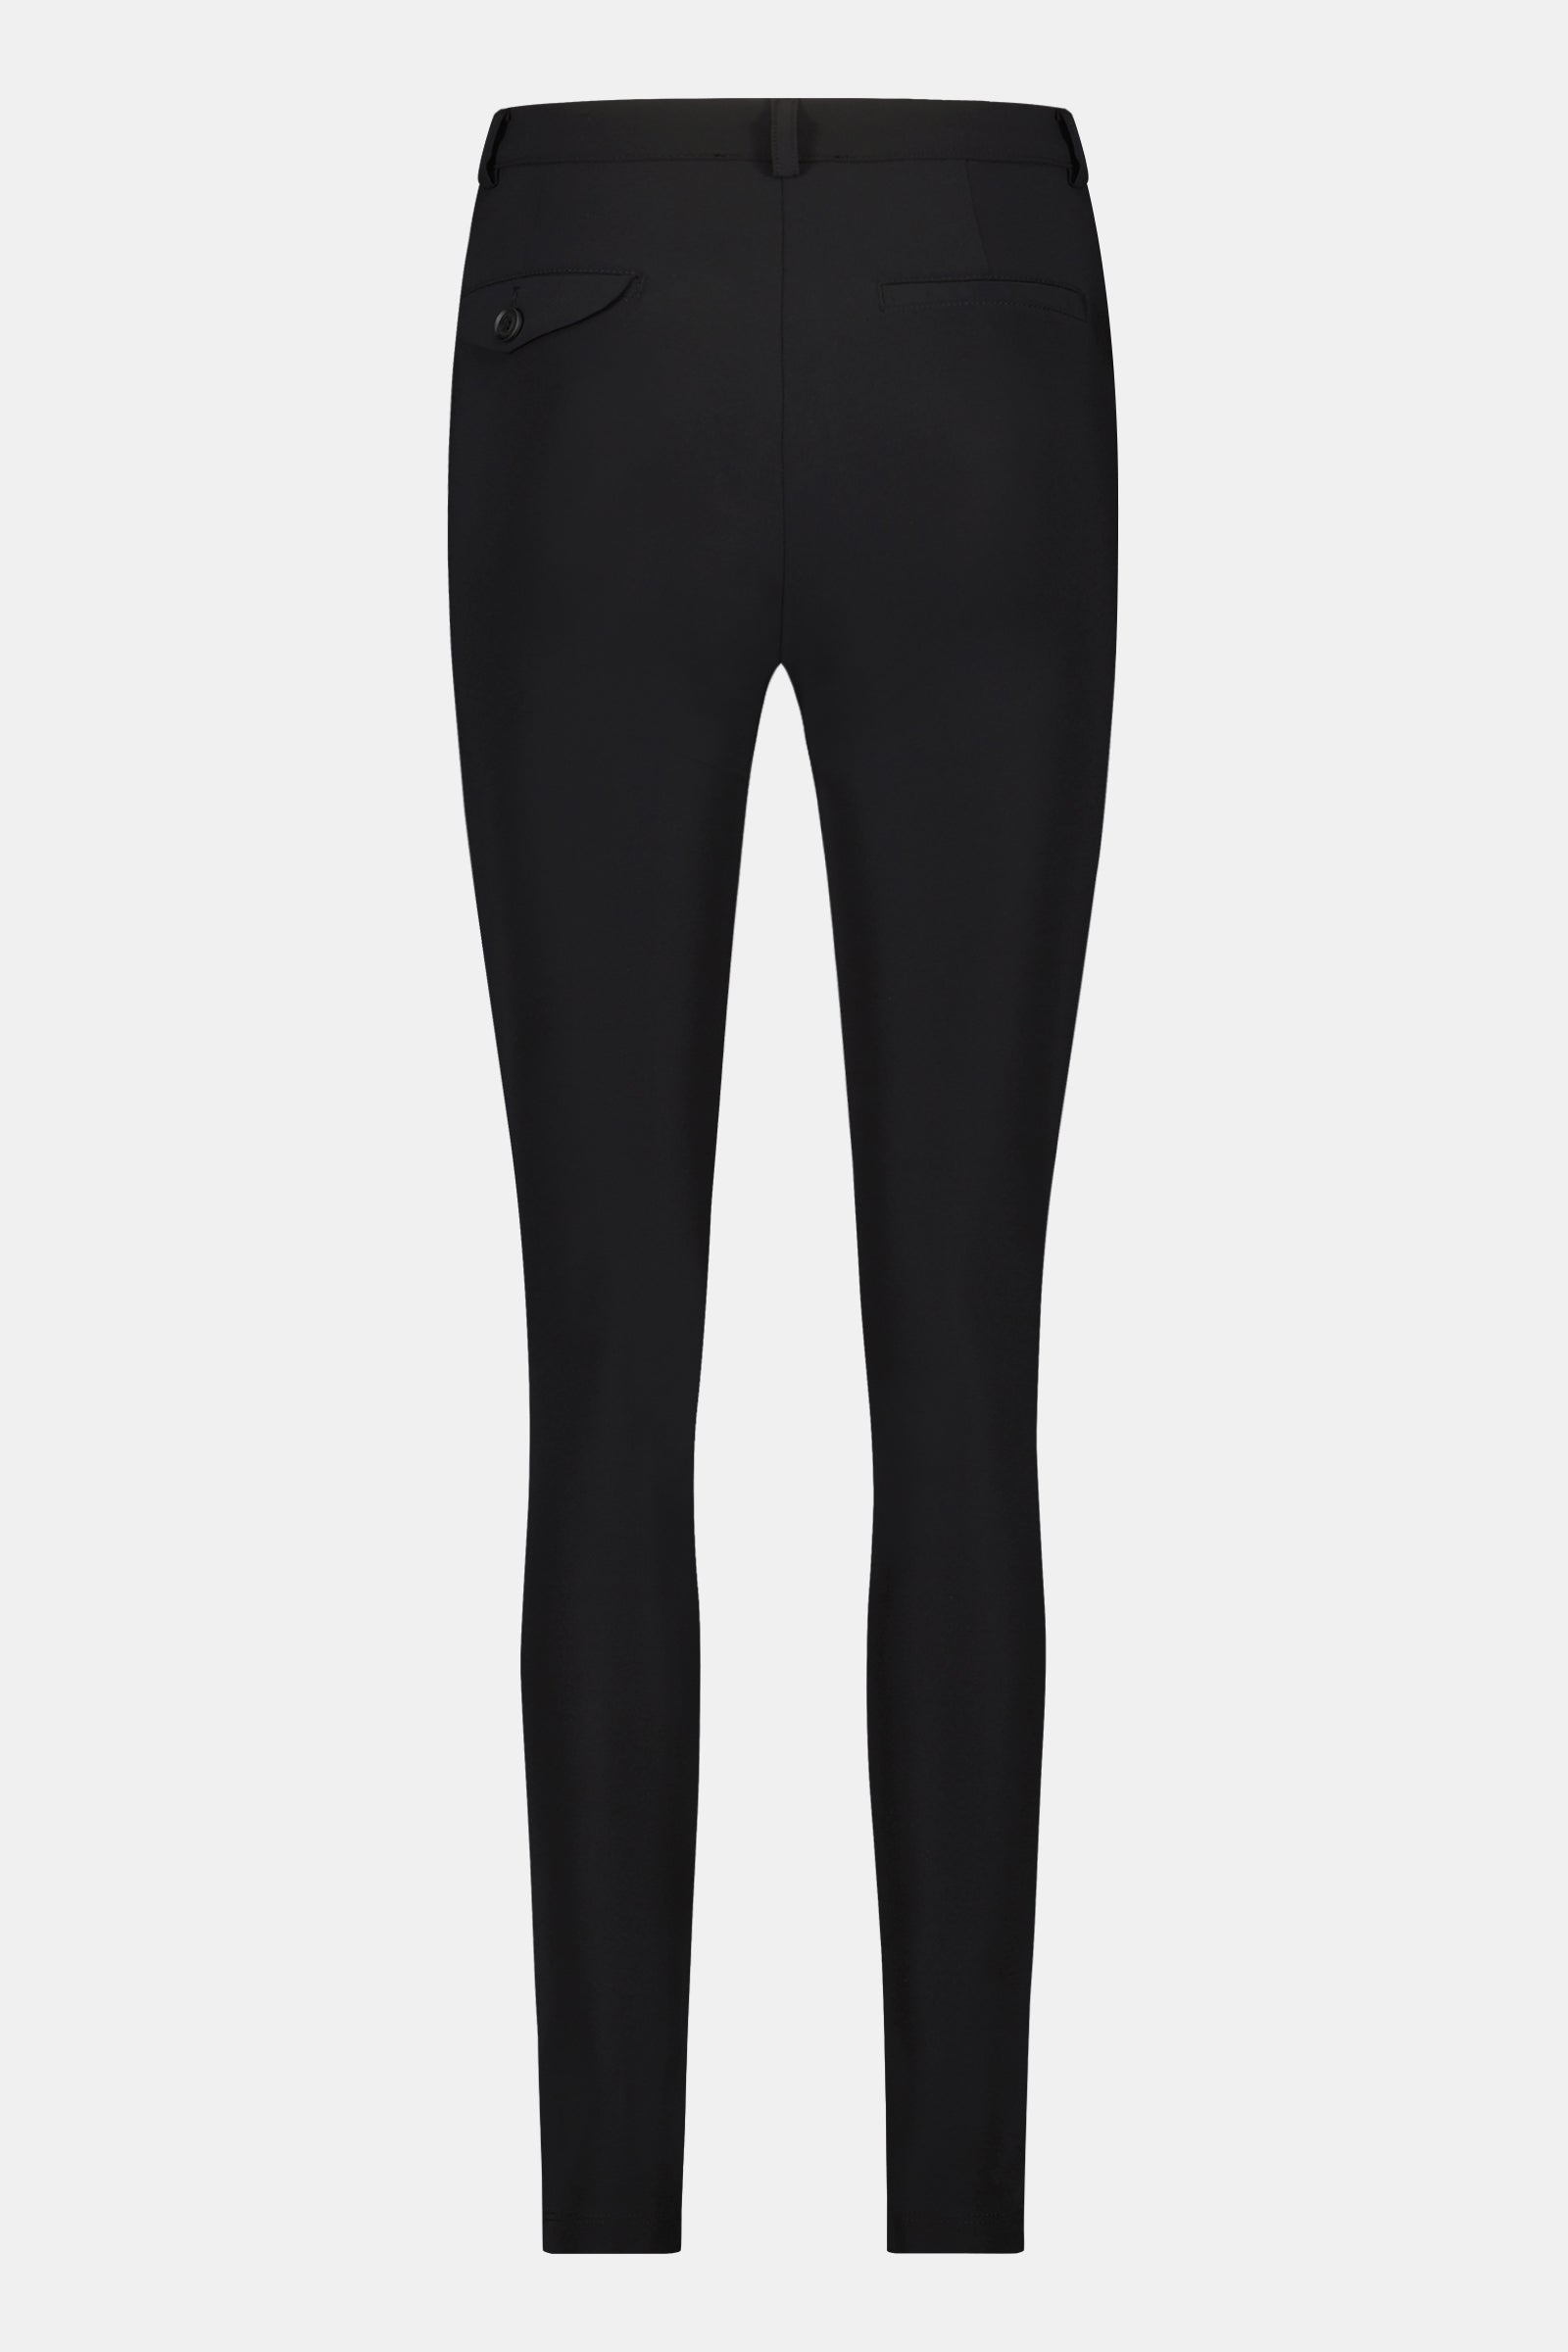 TROUSERS (ROSY) BLACK